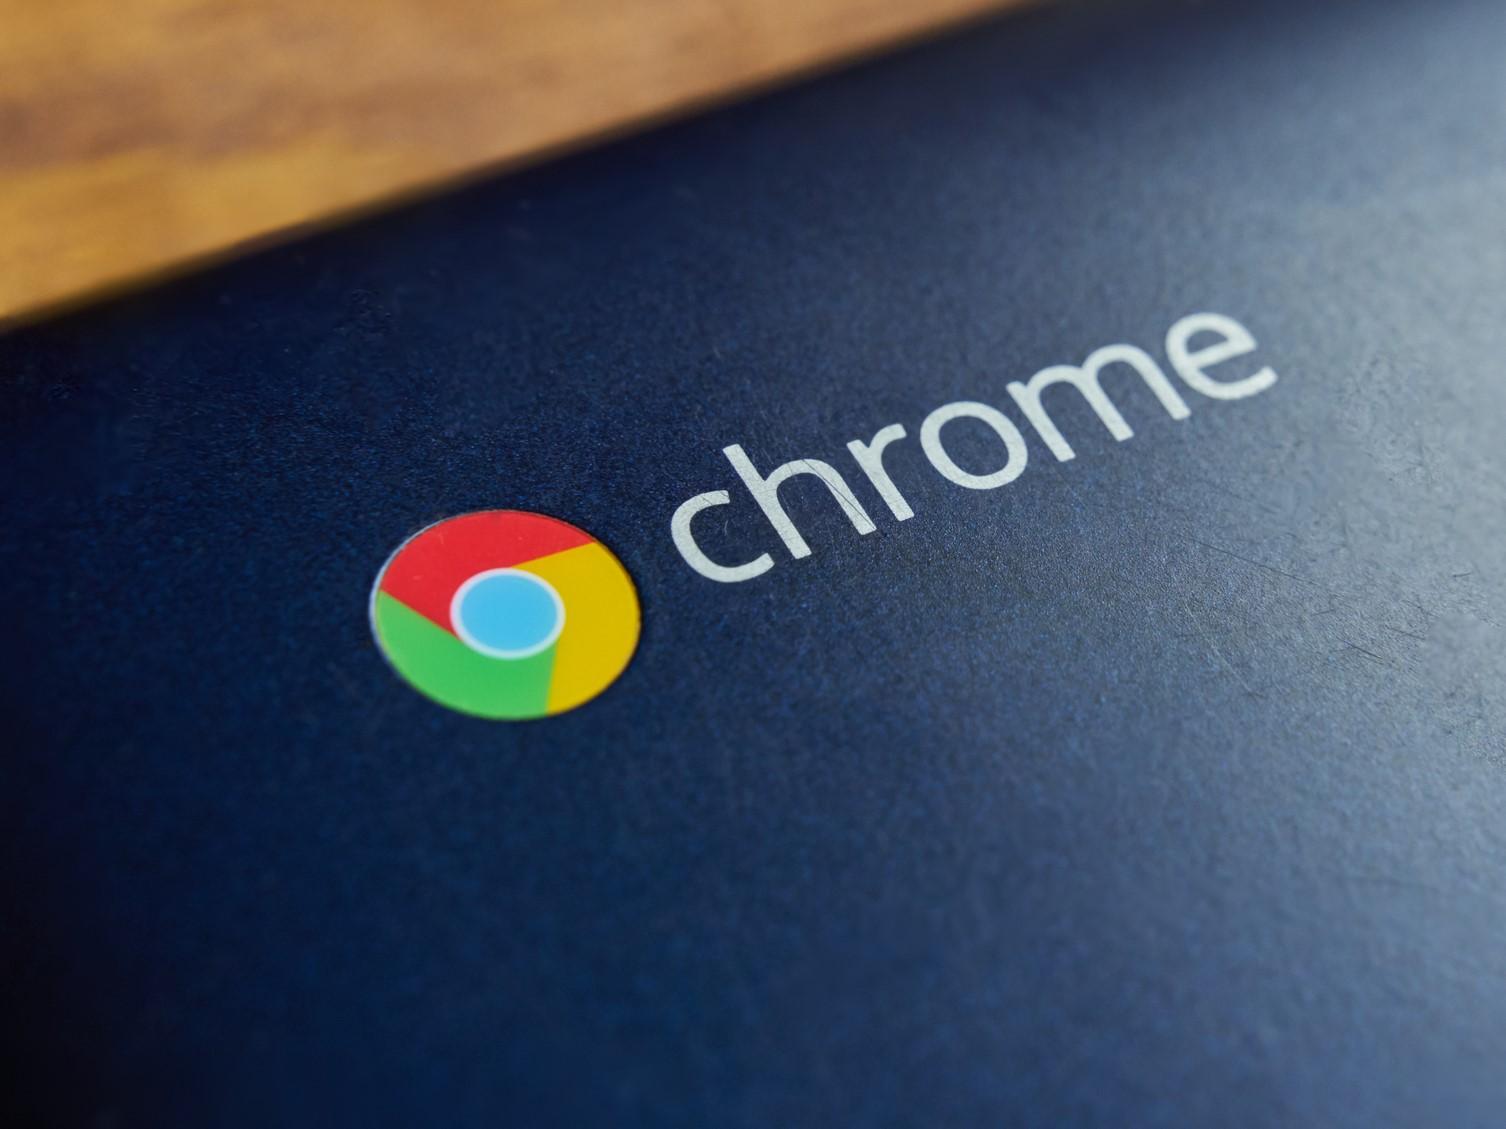 Google Chrome 69 has already rolled out to millions of web users